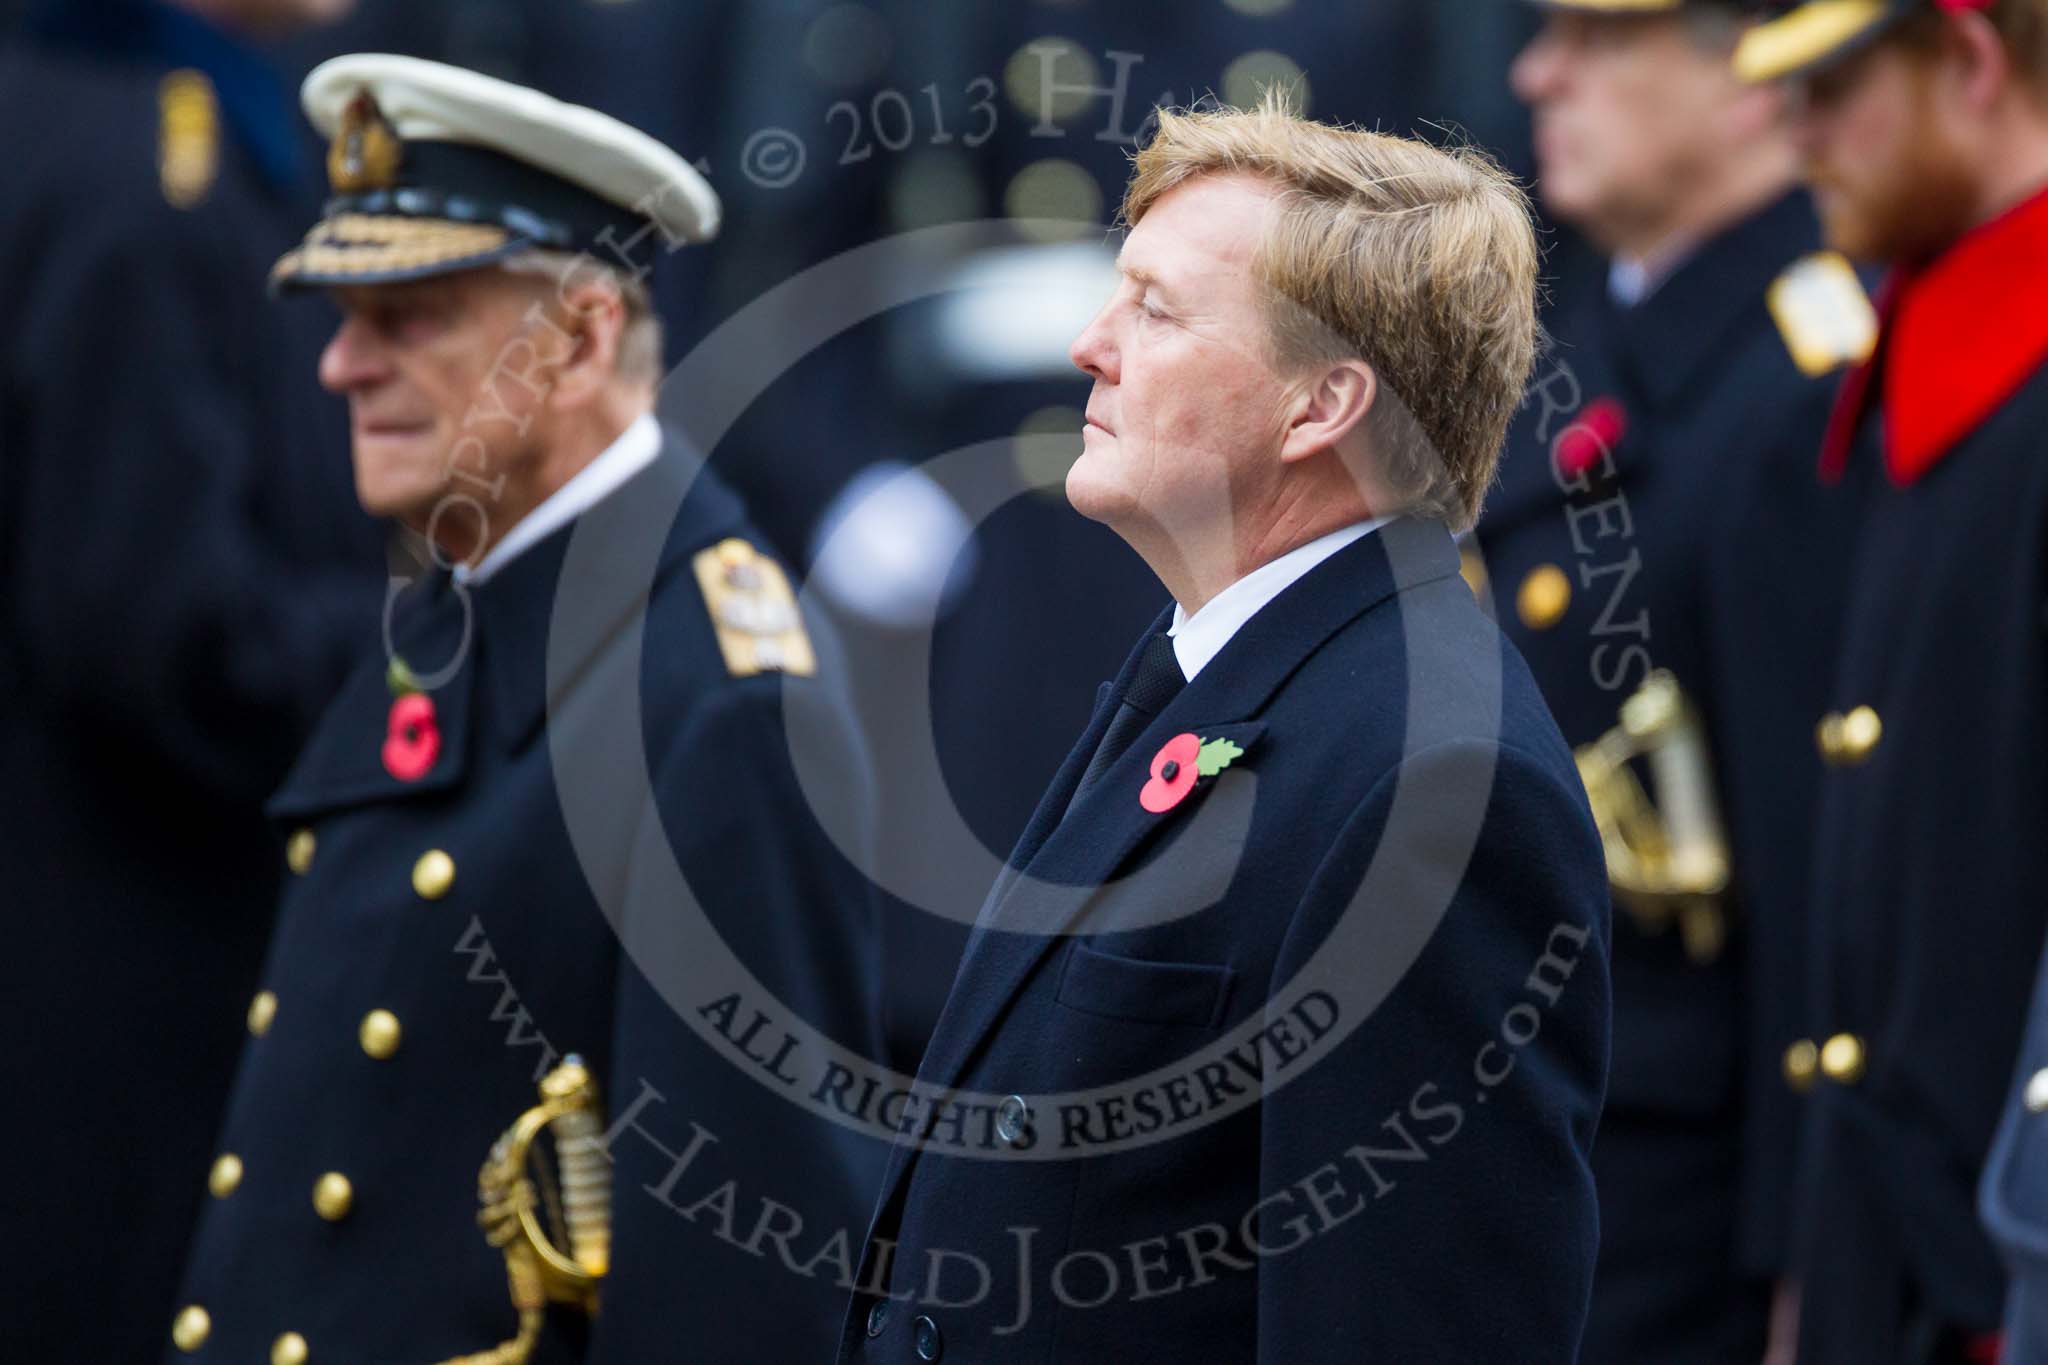 Remembrance Sunday at the Cenotaph 2015: HM The King of the Netherlands, Willem-Alexander, standing next to HM The Duke of Edinburgh at the Cenotaph on Remembrance Sunday 2015. Image #139, 08 November 2015 10:59 Whitehall, London, UK